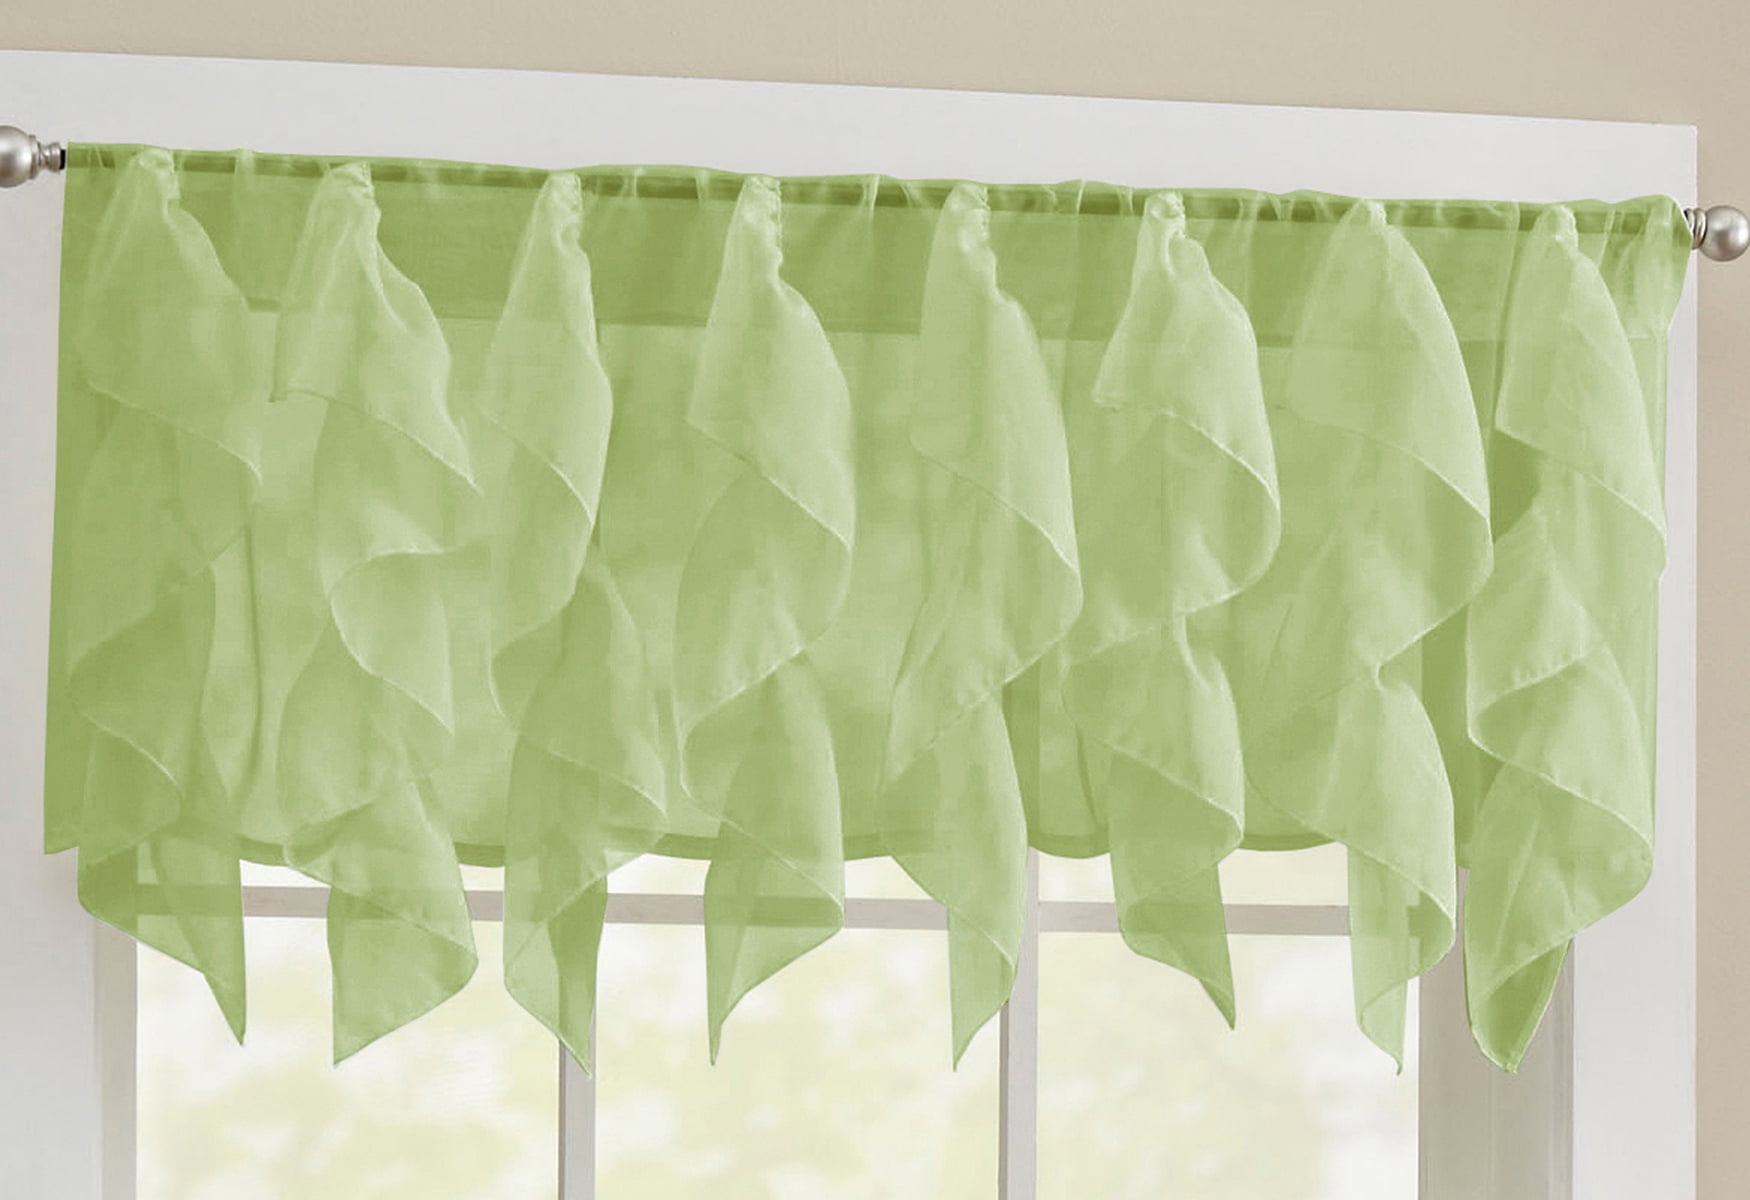 Sheer Voile Vertical Ruffle Window Kitchen Curtain Tiers or Valance Mint 